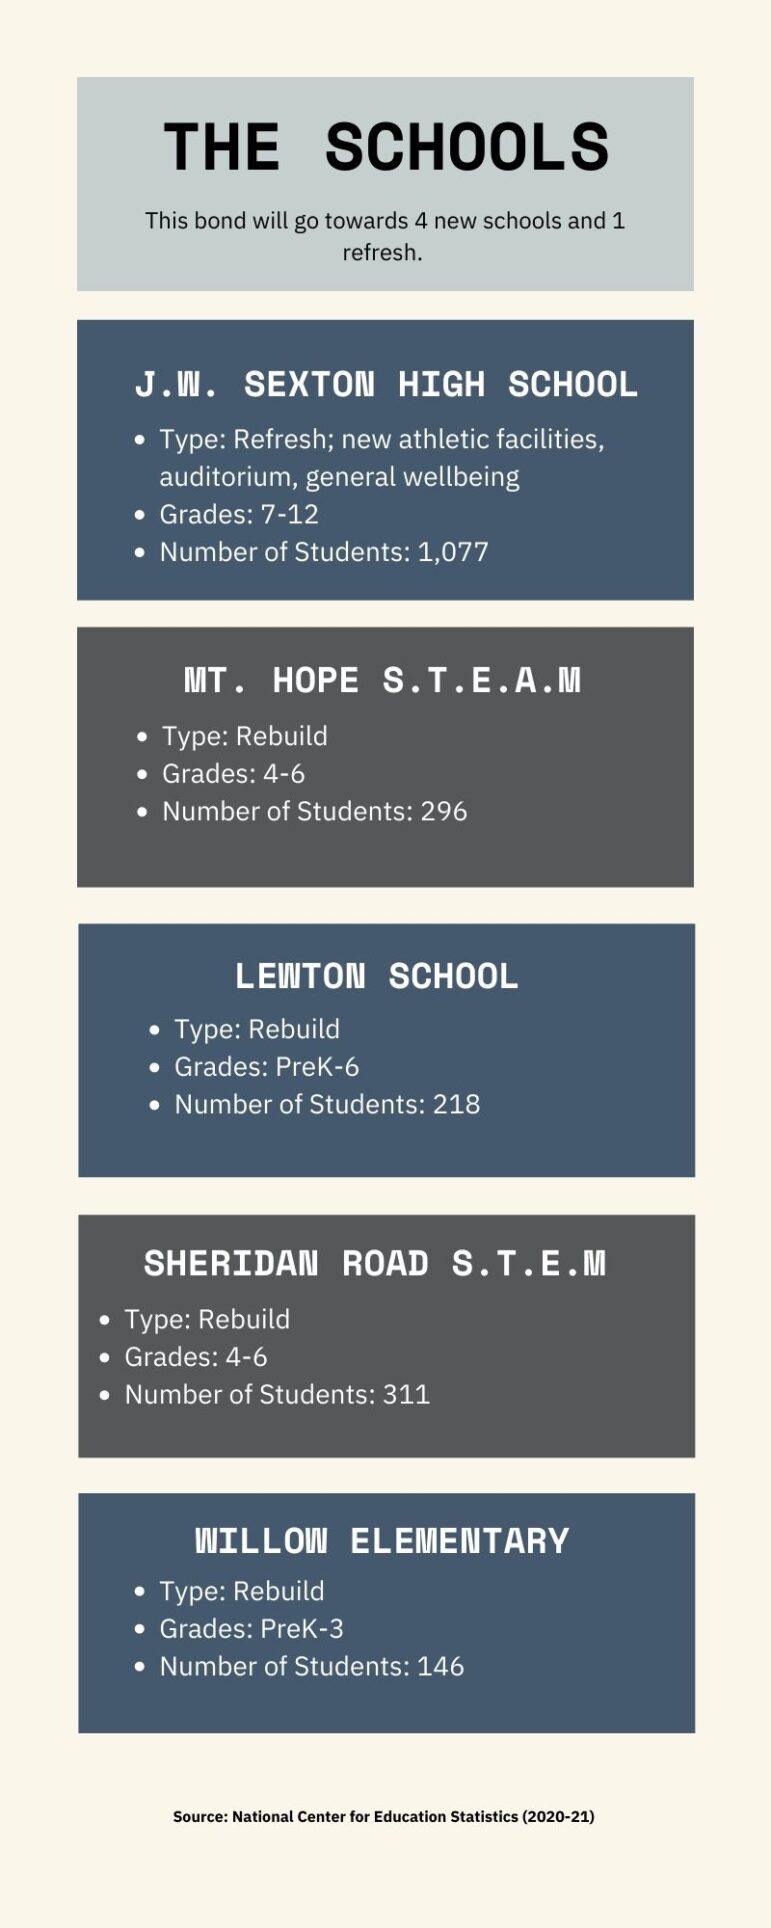 This graphic shows the five schools impacted by this bond. Sexton High School will receive a refresh, and Mt. Hope, Sheridan Road, Lewton, and Willow Elementary will be rebuilt if the bond is passed.